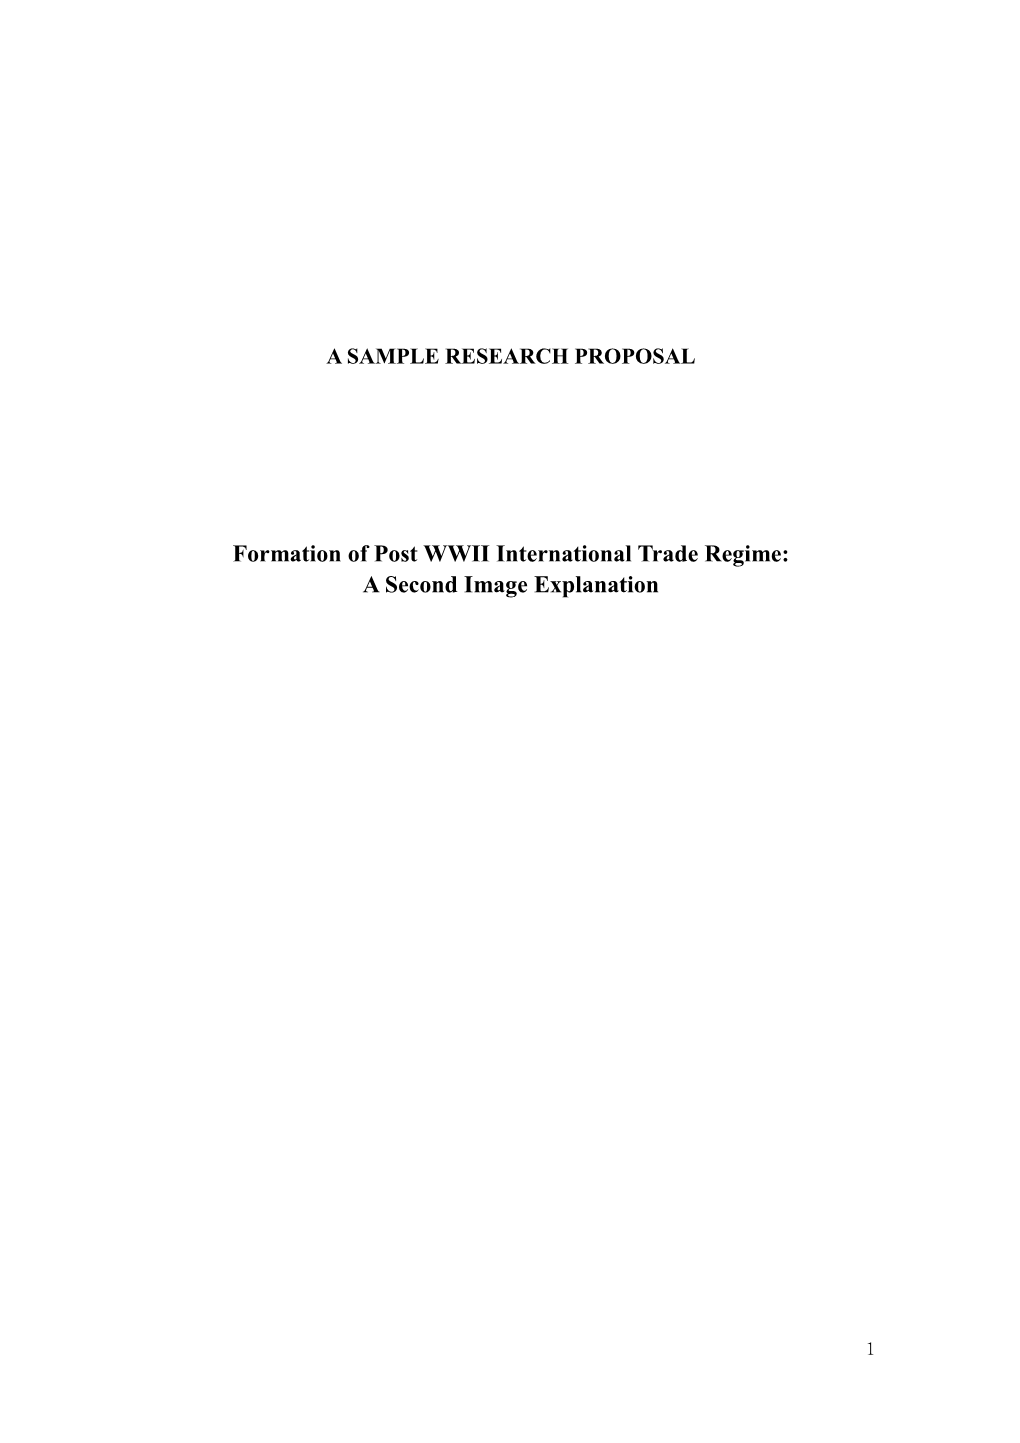 Formation of Post WWII International Trade Regime